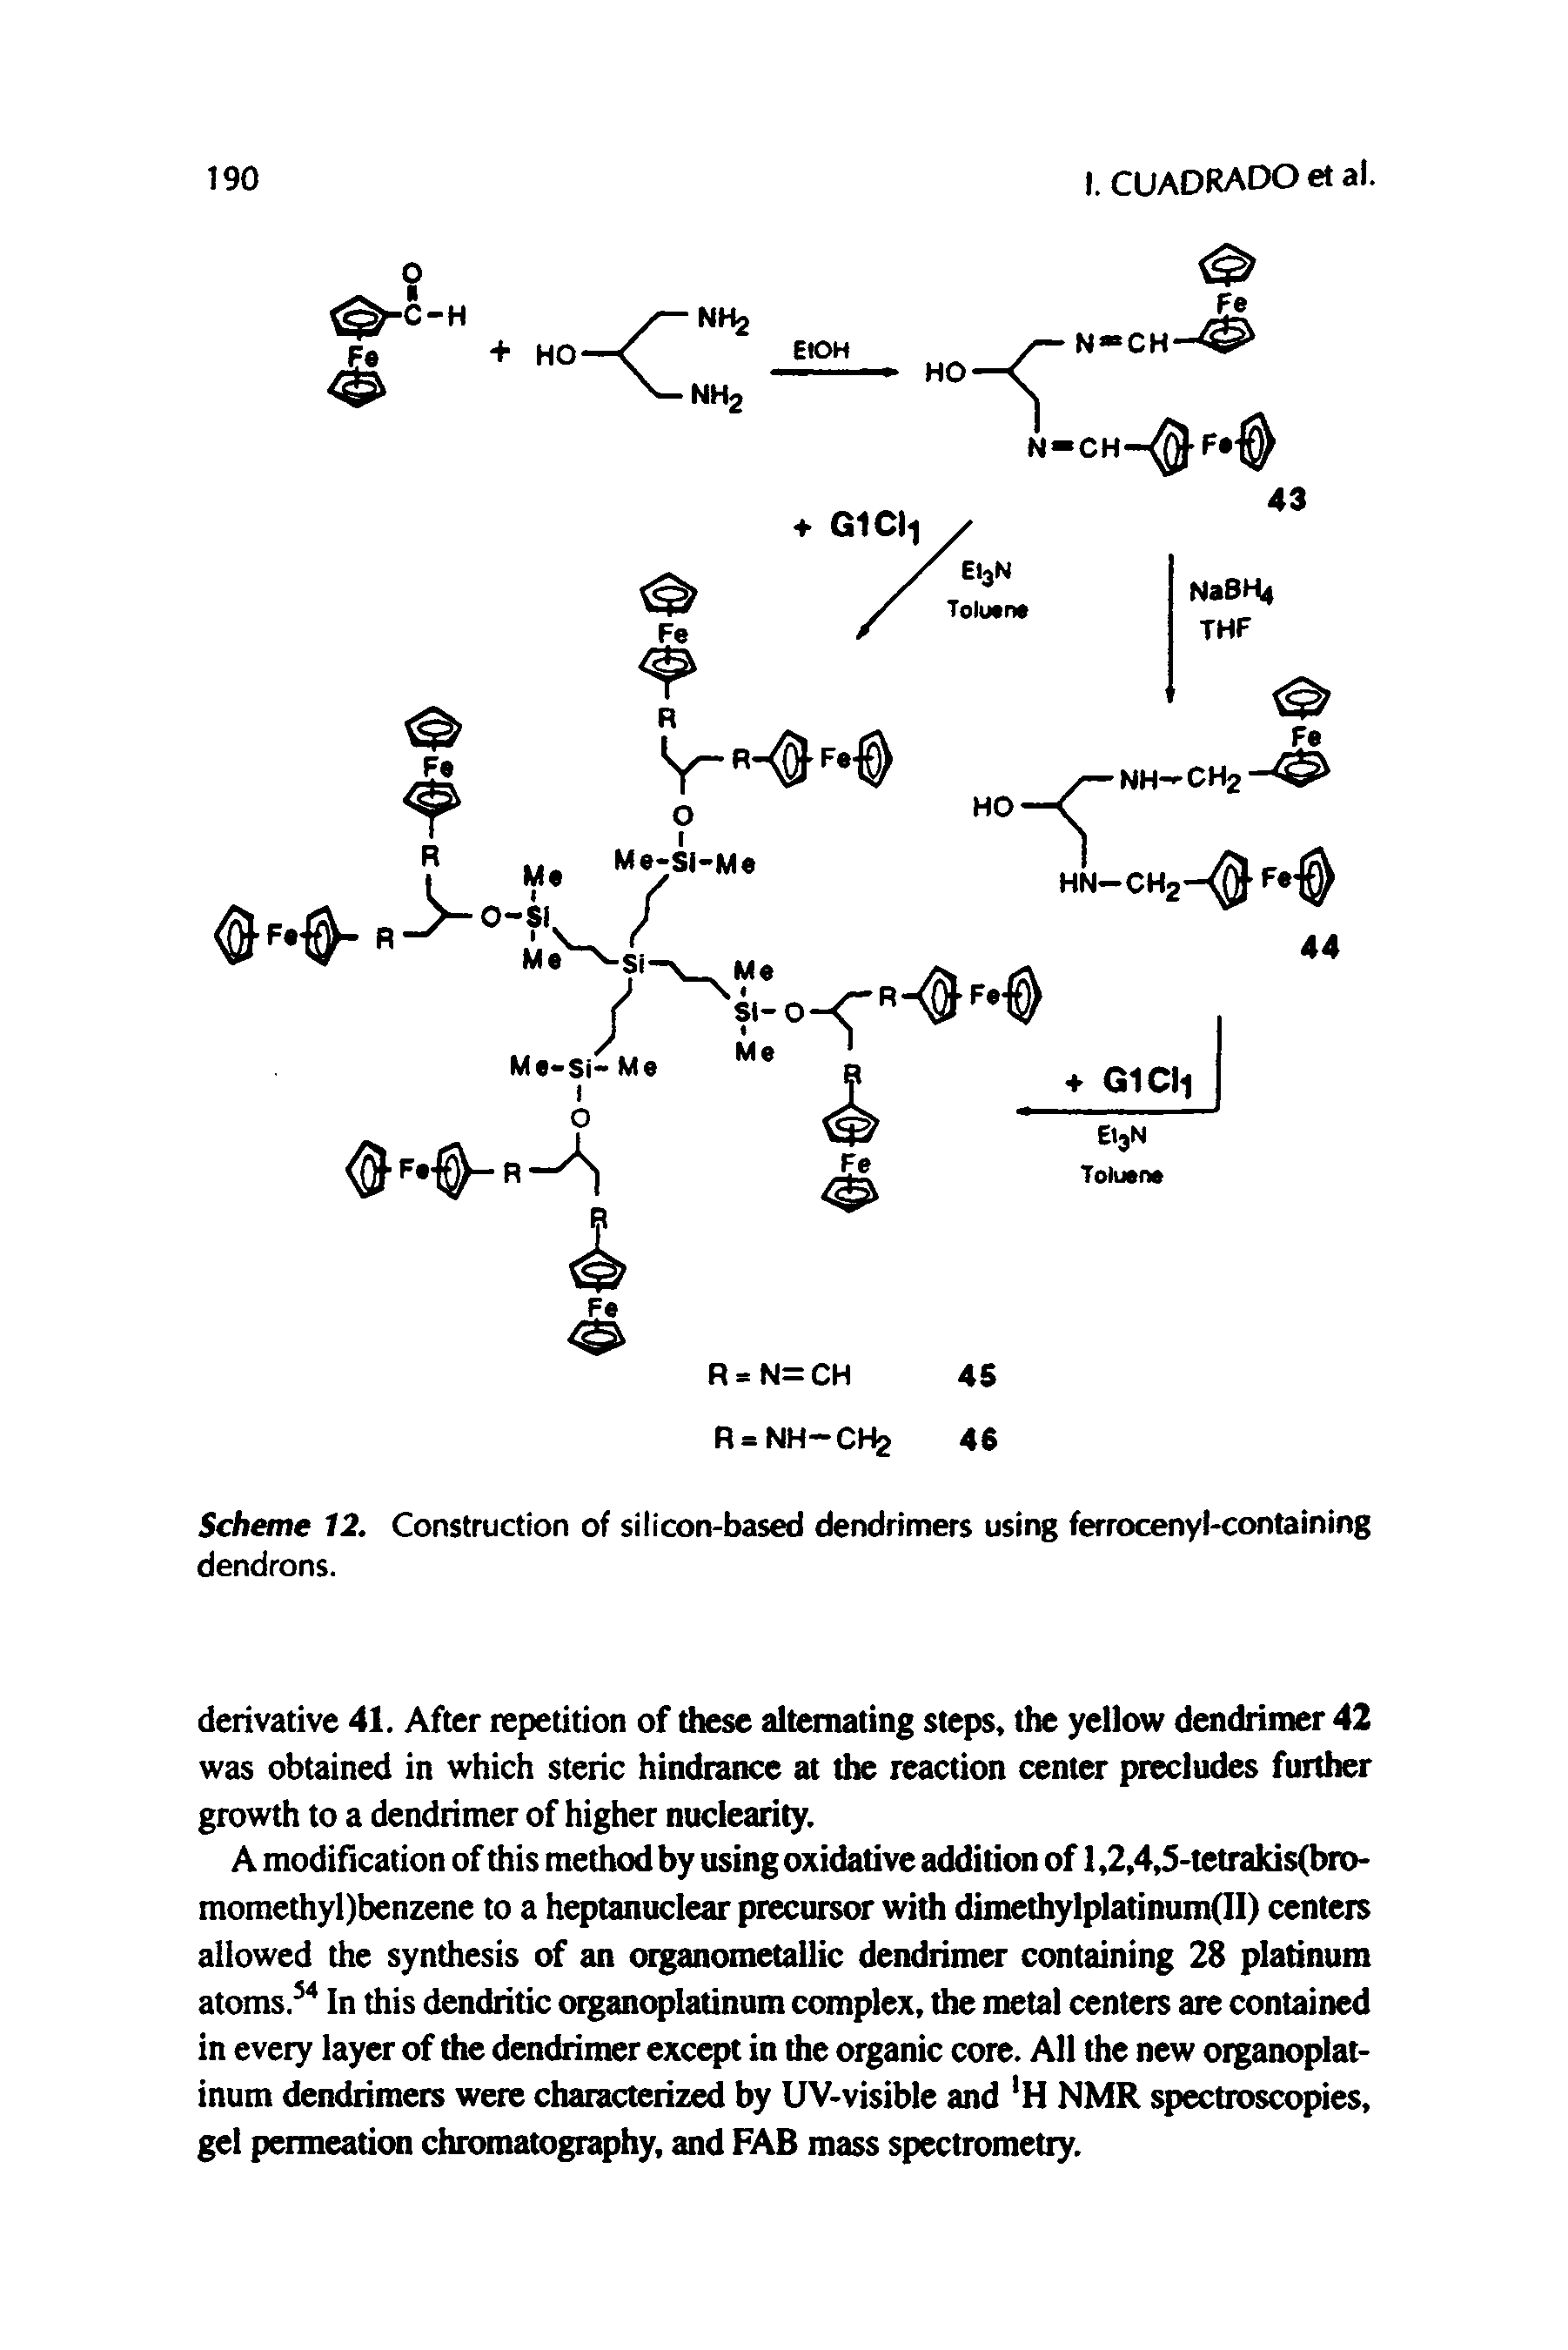 Scheme 12. Construction of silicon-based dendrimers using ferrocenyl-containing dendrons.